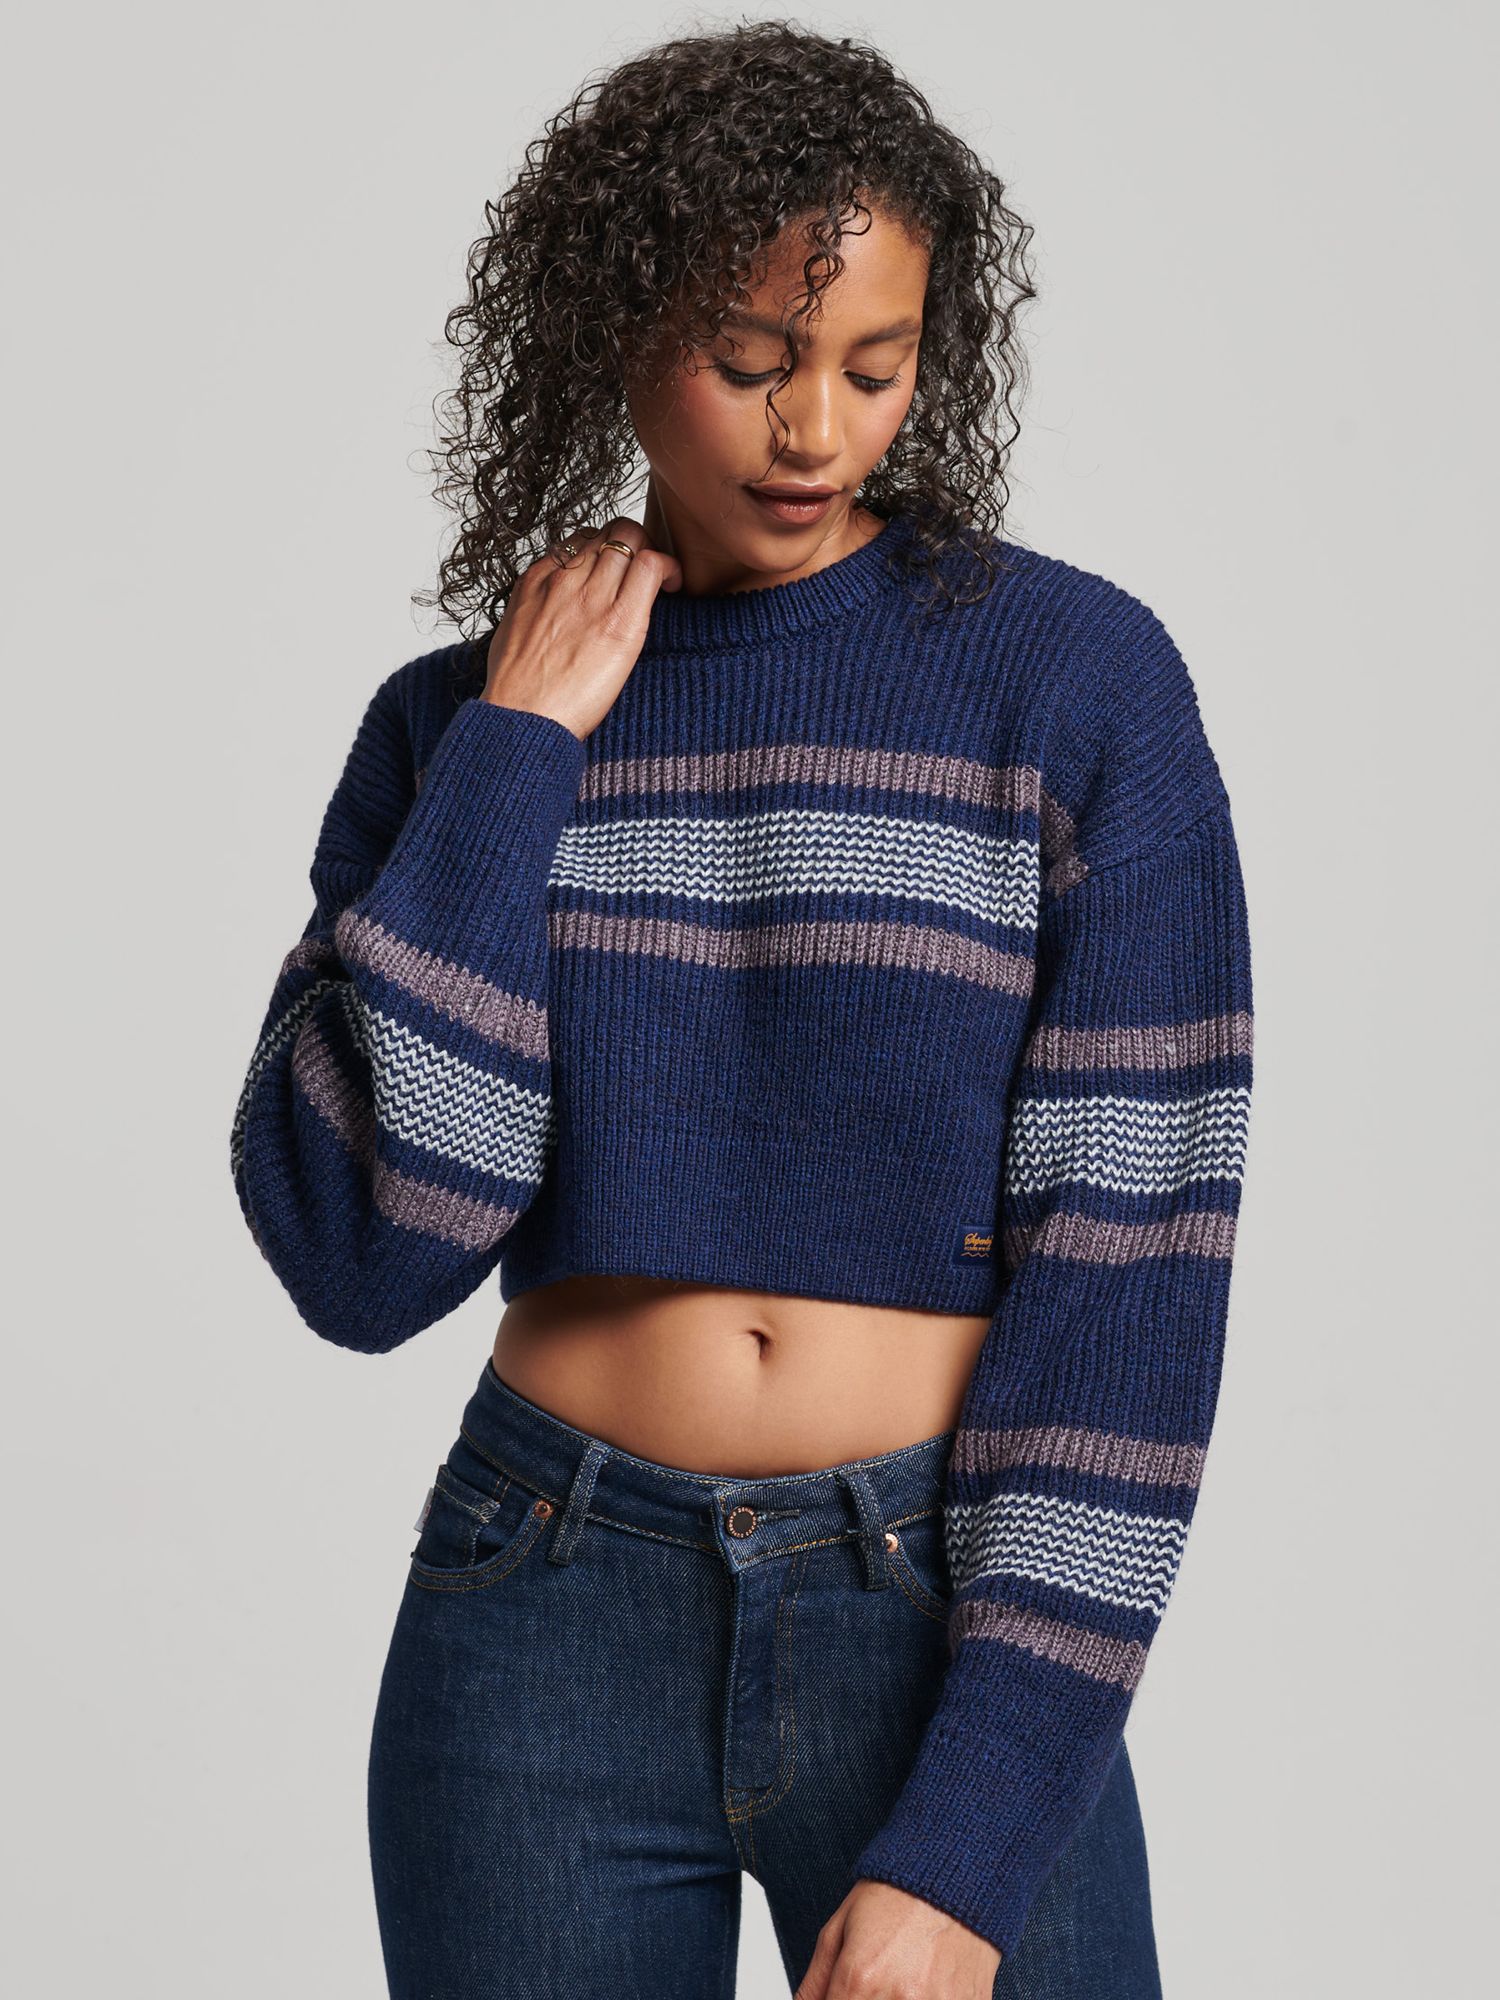 Buy Superdry Cropped Classic Crew Jumper Online at johnlewis.com